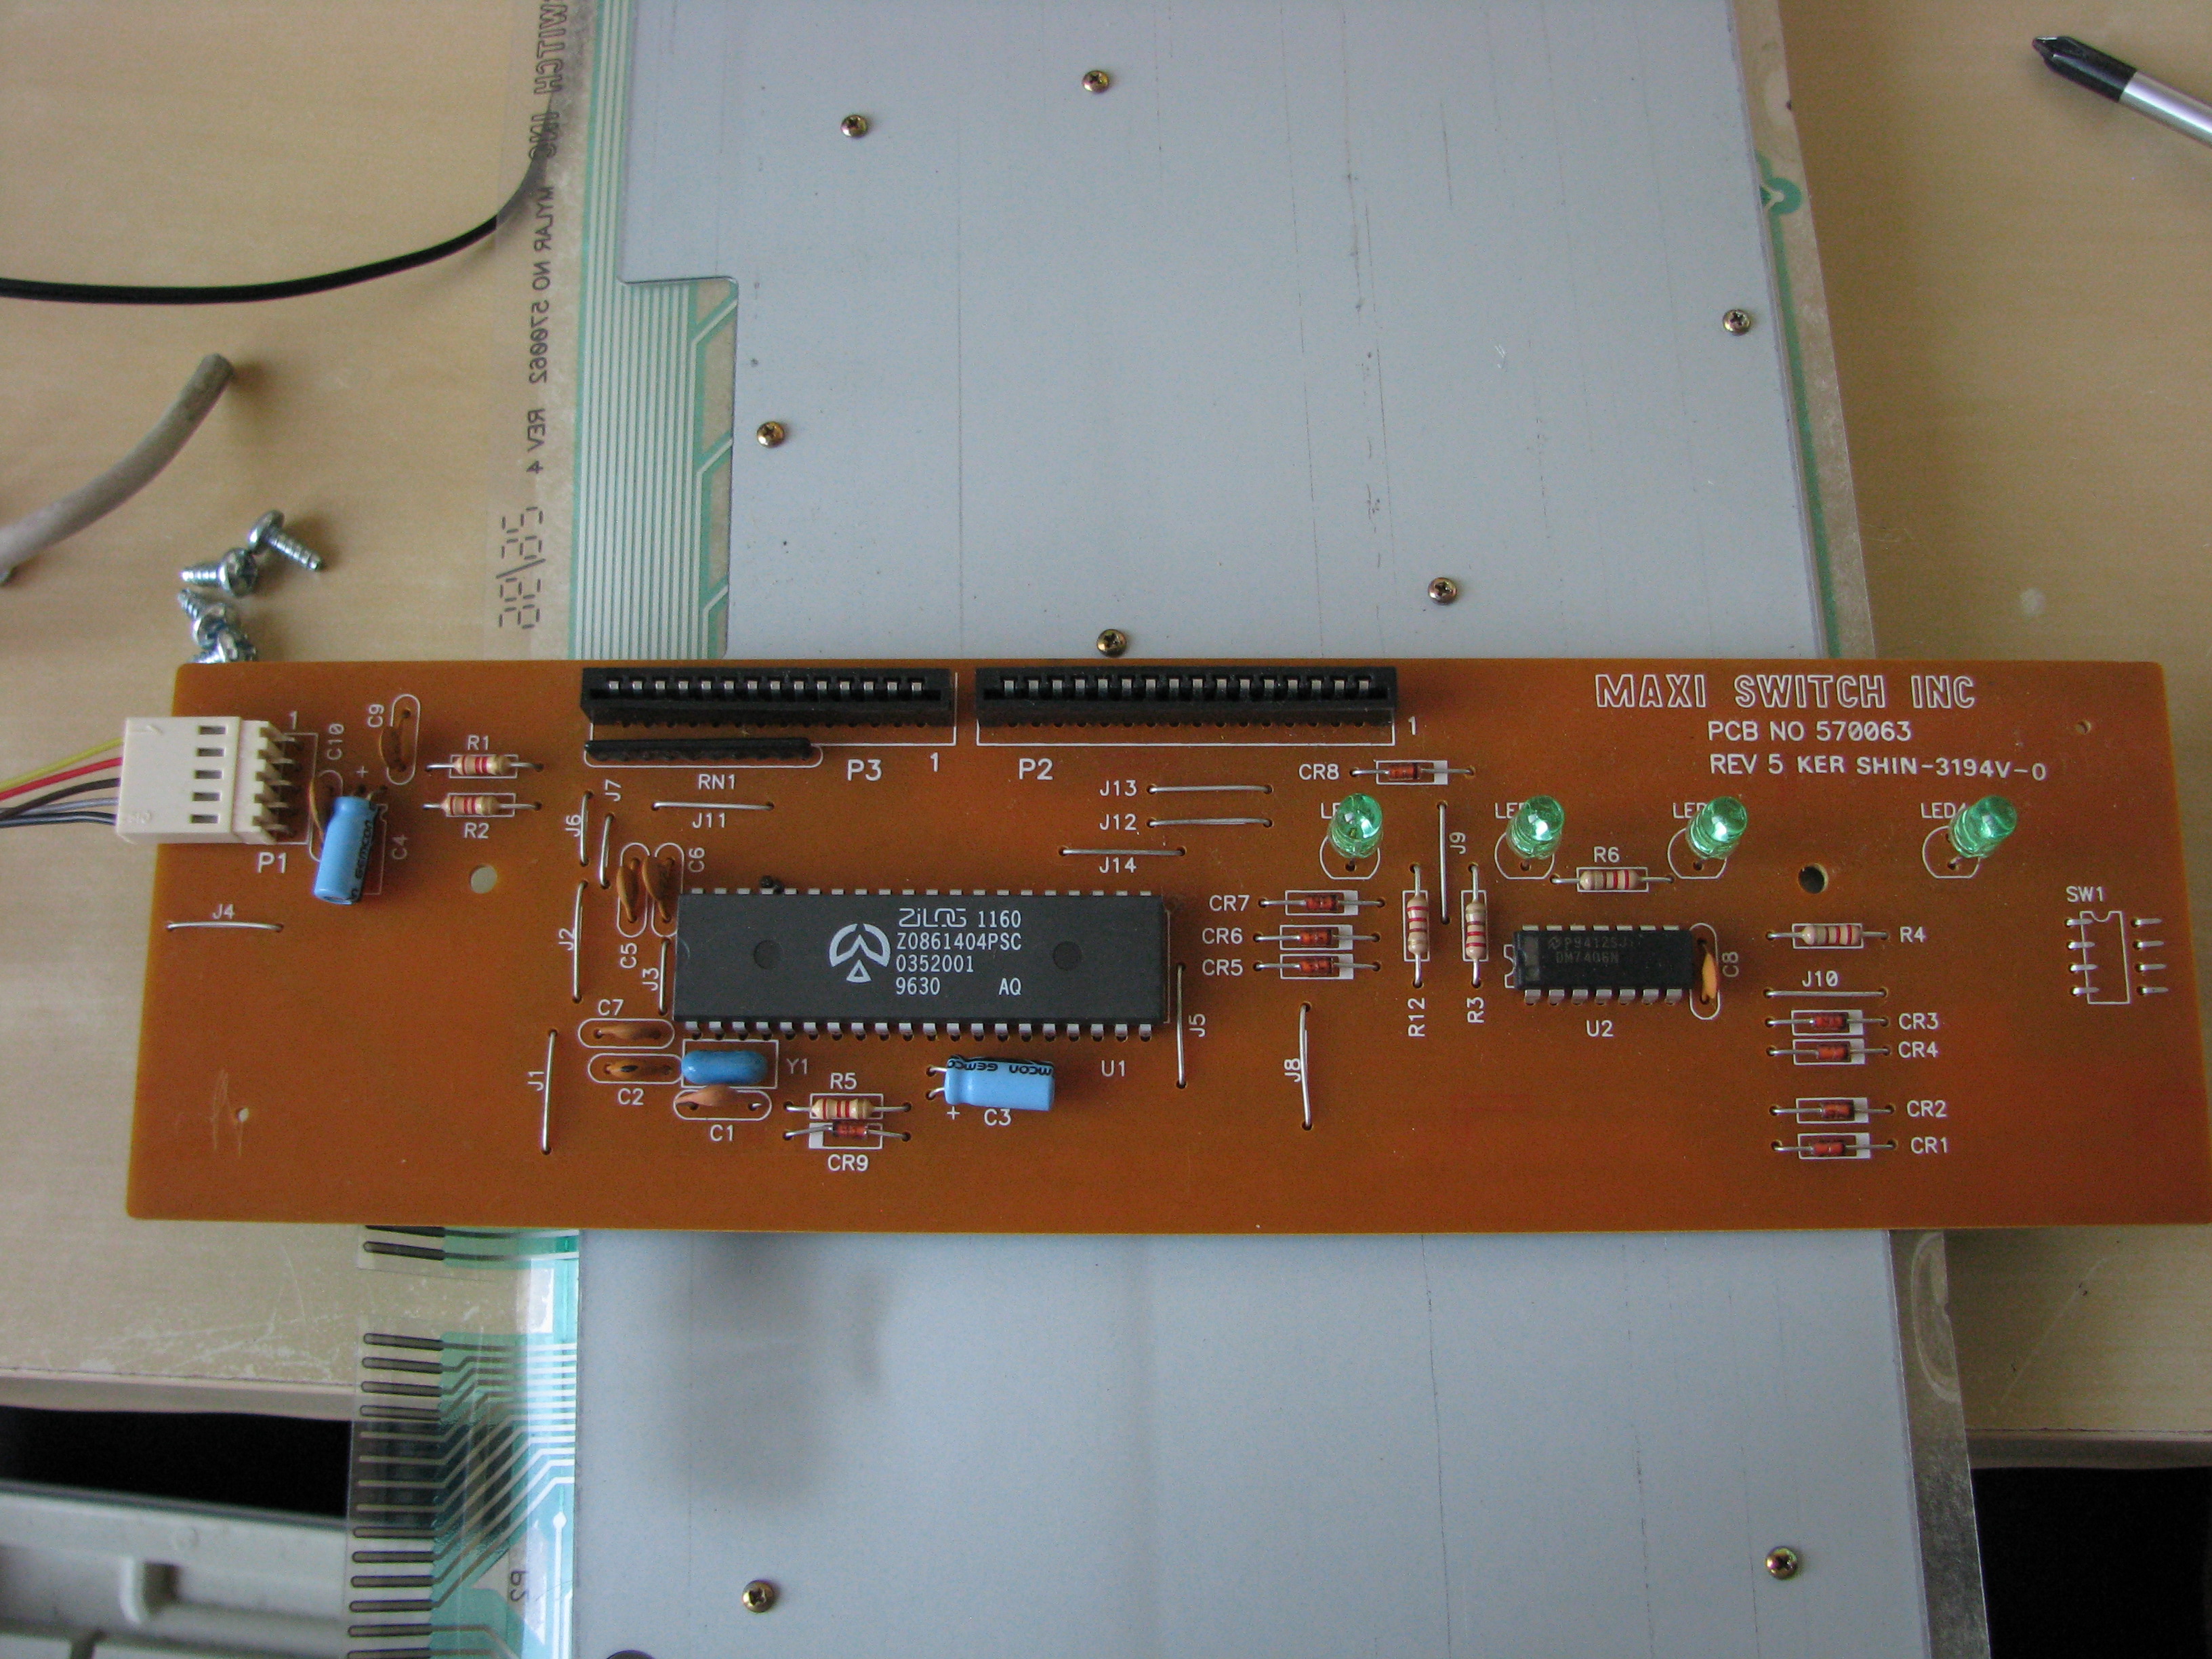 Mainboard with chipset